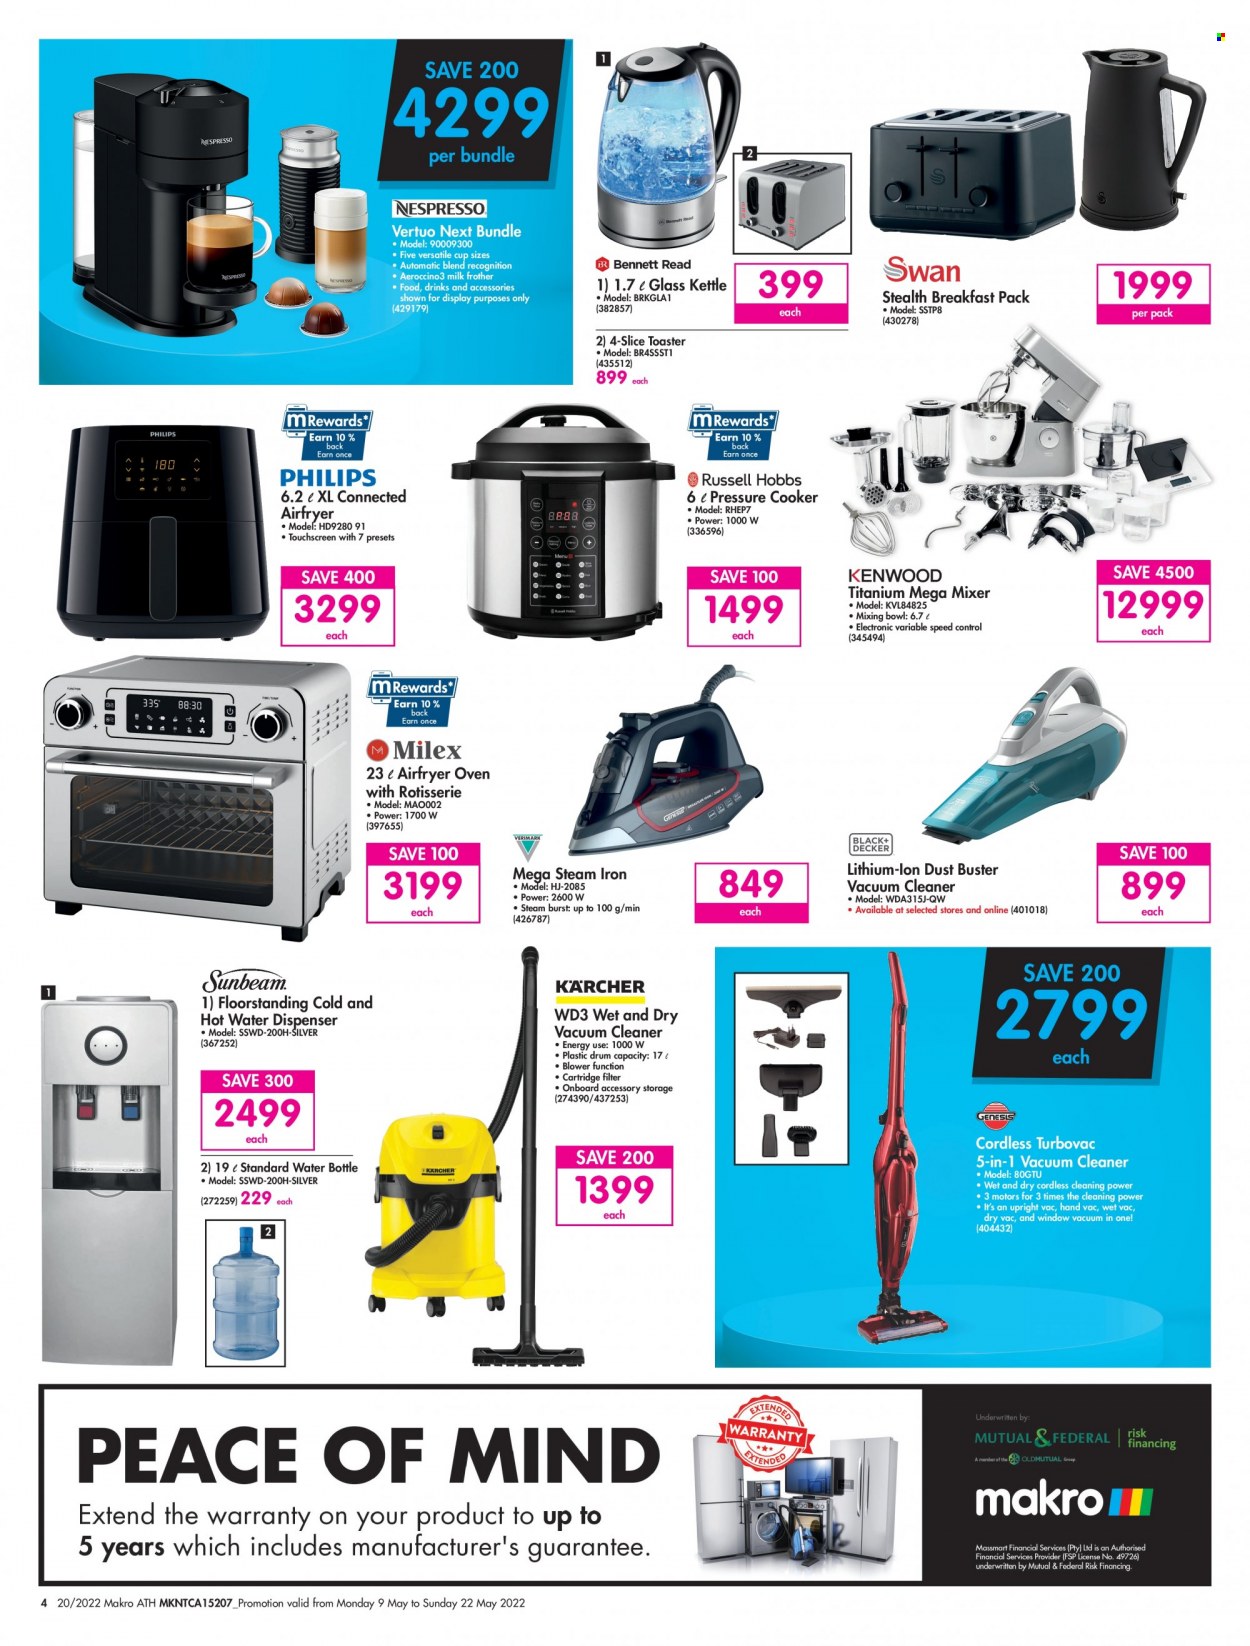 Makro Specials  - 05.09.2022 - 05.22.2022. Page 4.